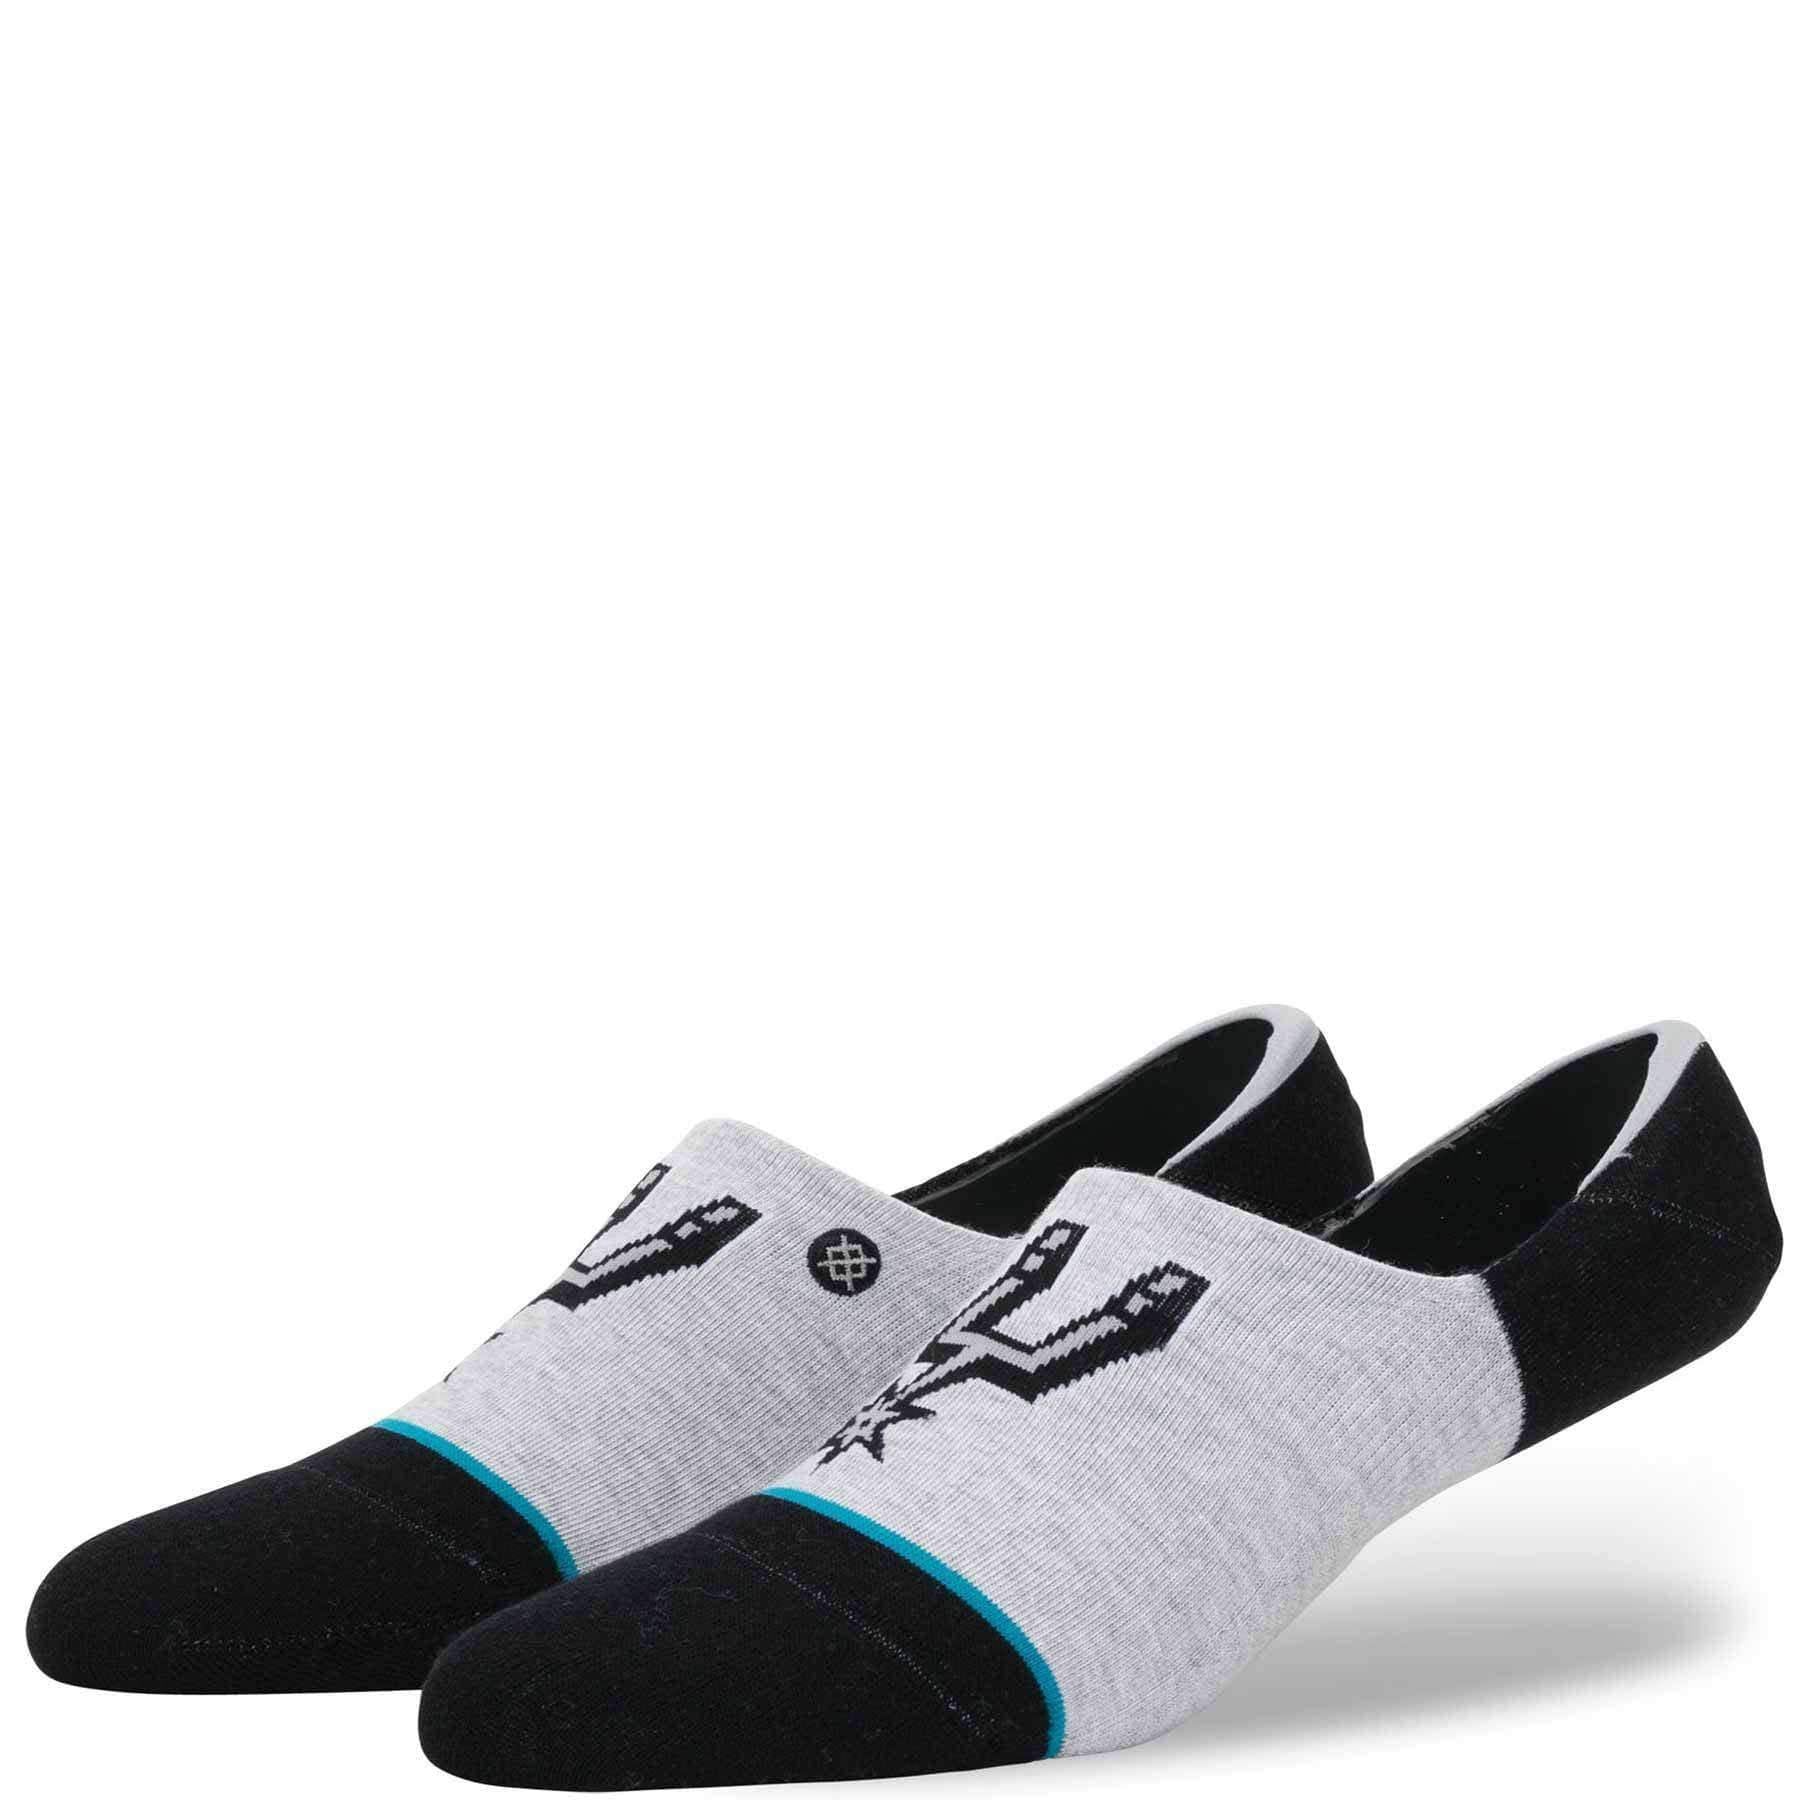 Stance NBA Arena Spurs Invisible Low Socks in Heather Grey Mens Low/Ankle Socks by Stance